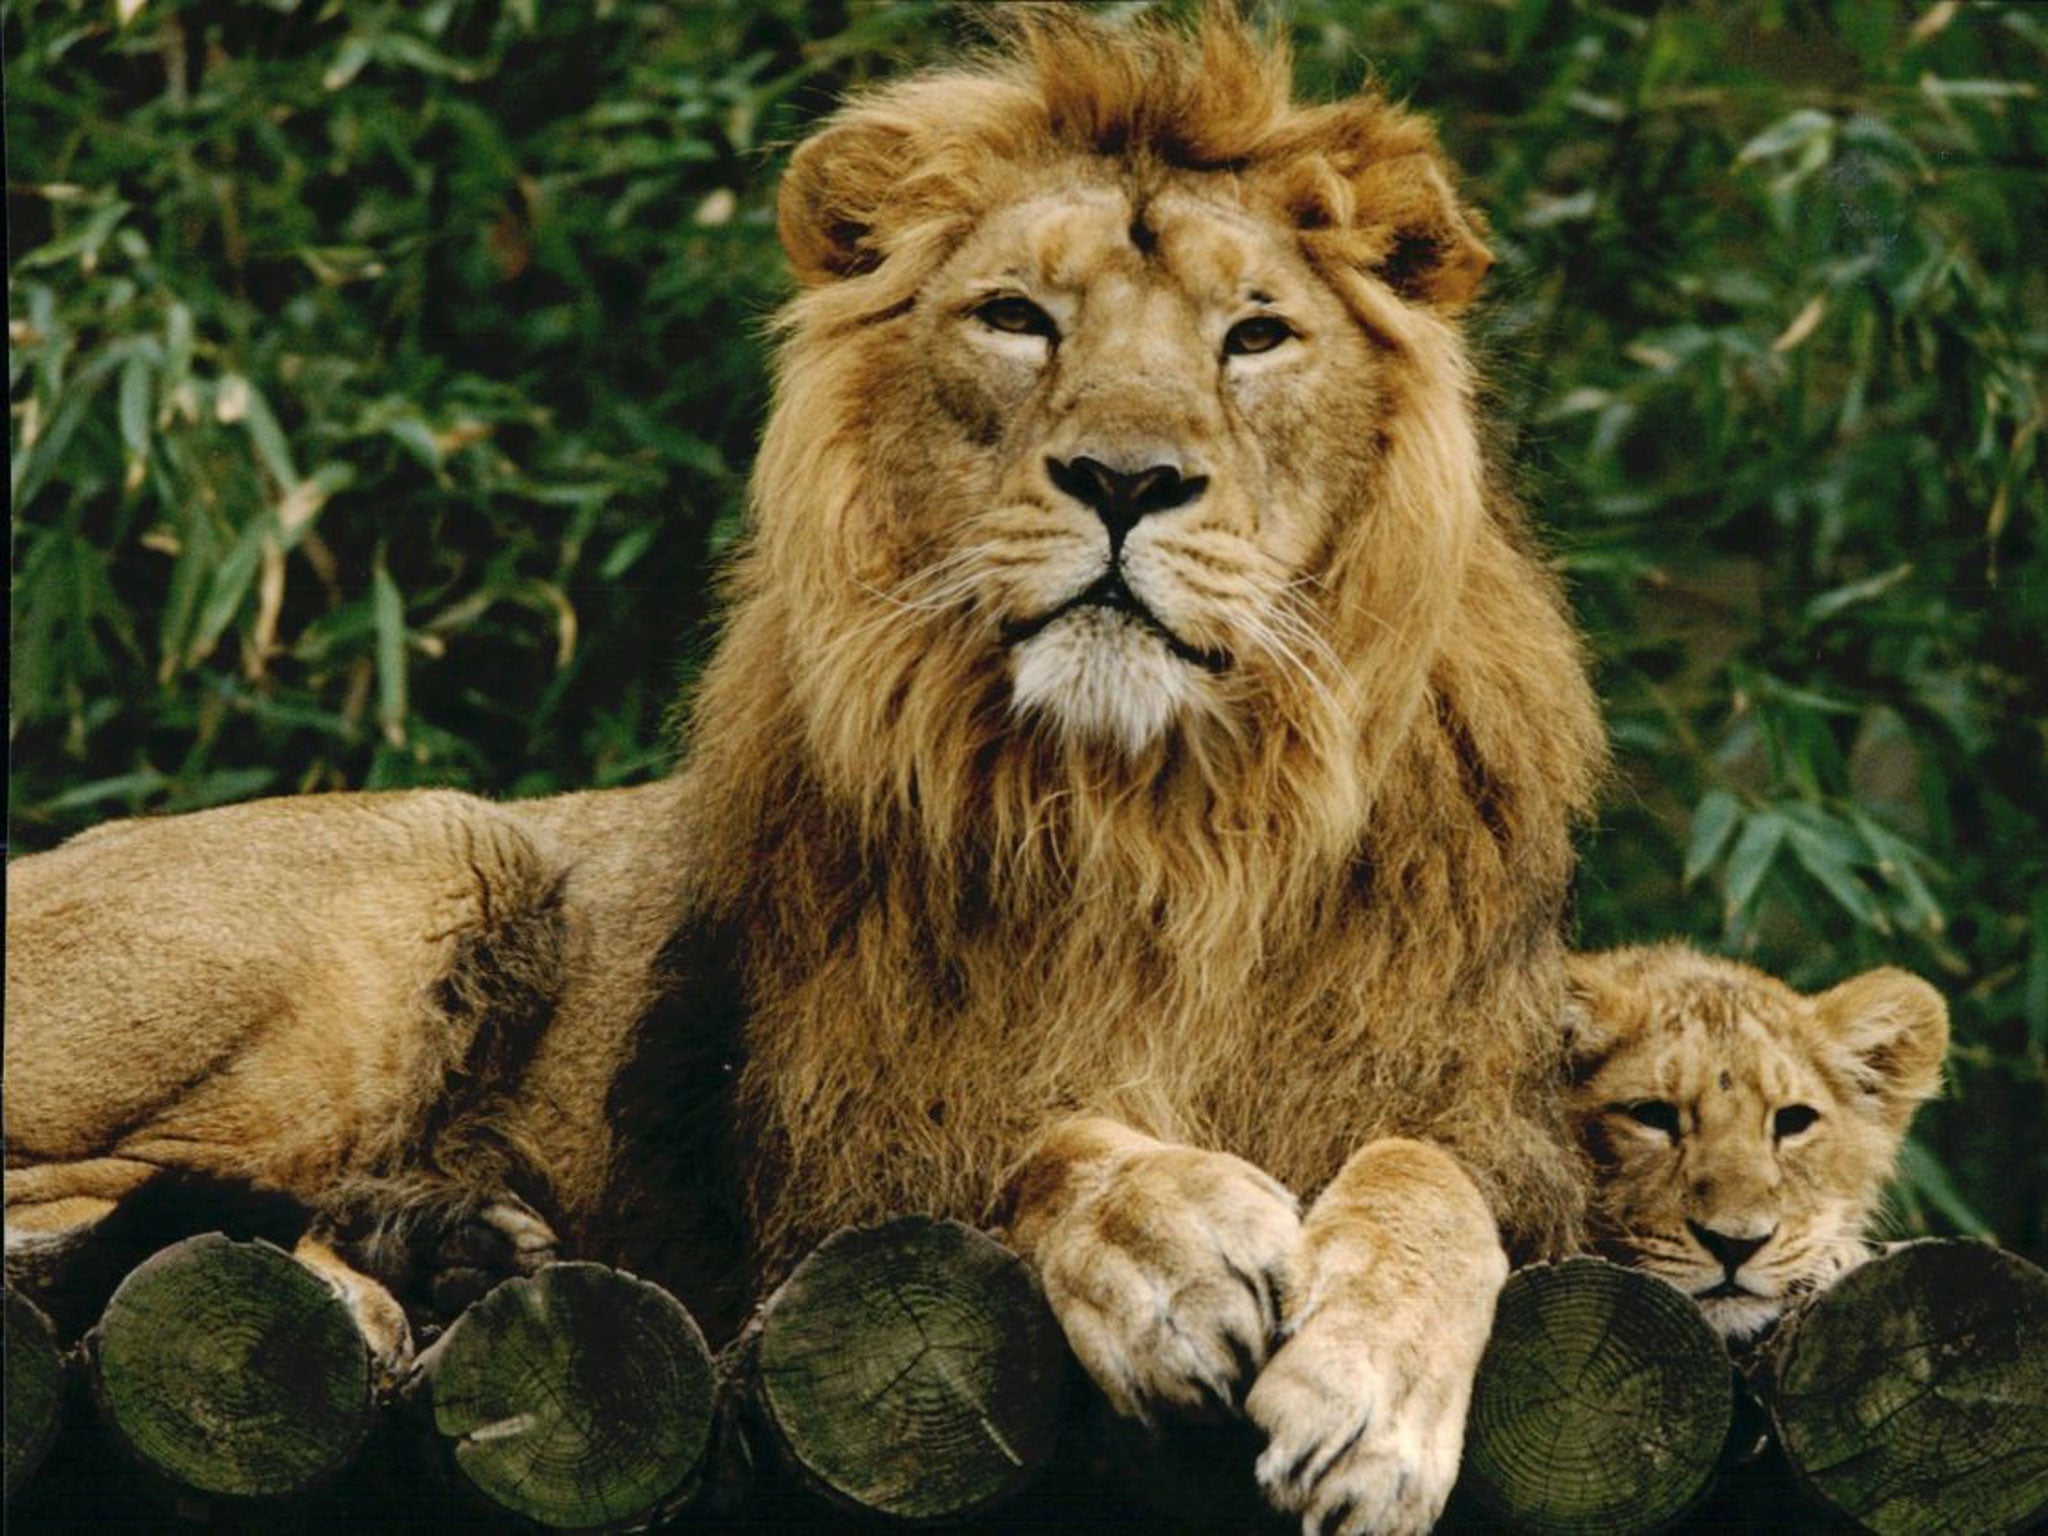 A male Asiatic lion guarding his cub at London Zoo